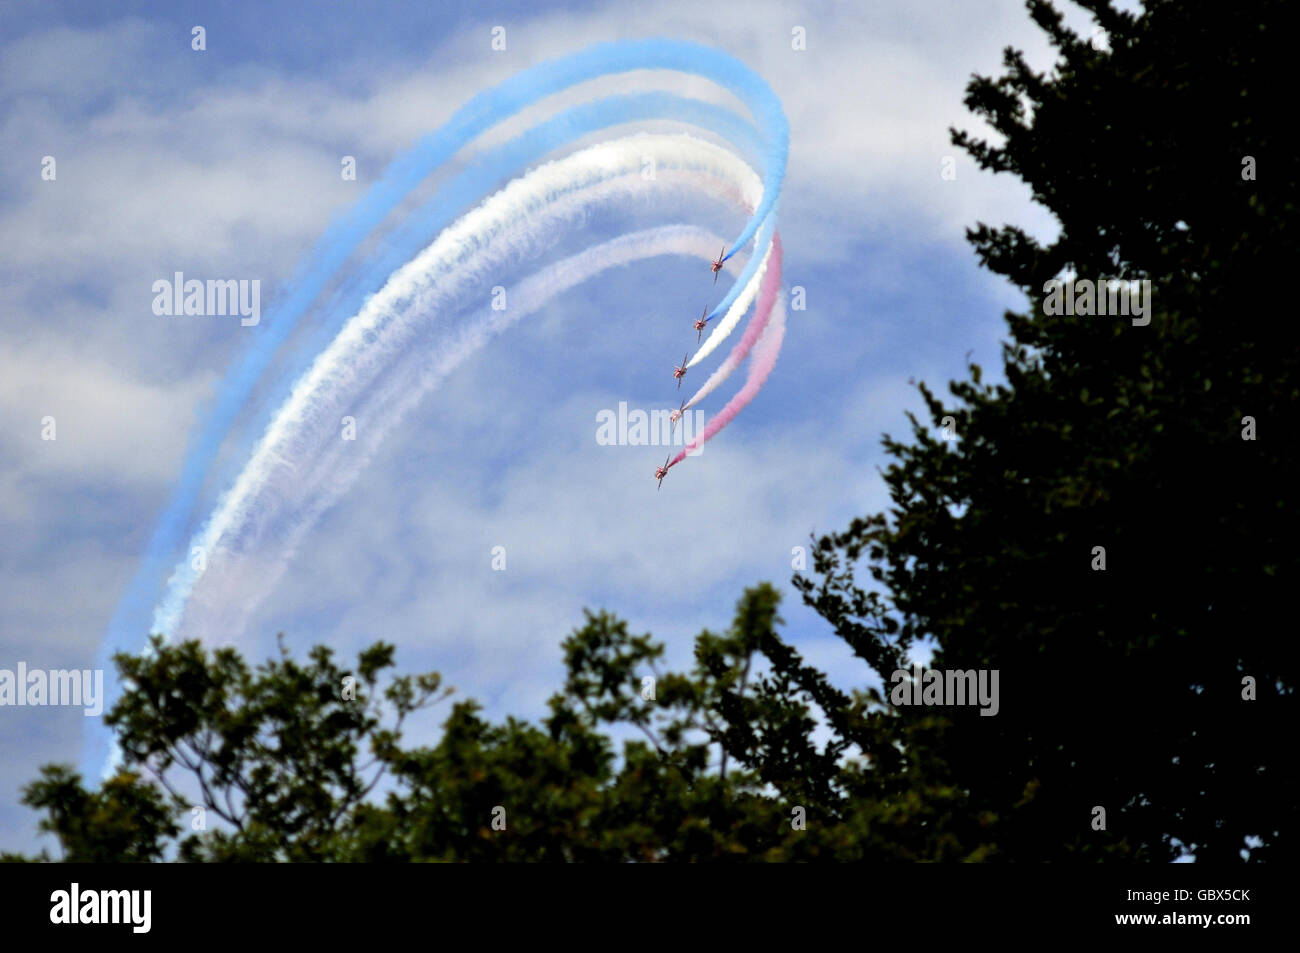 Auto - Goodwood Festival of Speed. The Red Arrows fly overhead in formation during the Goodwood Festival of Speed in Chichester, West Sussex. Stock Photo